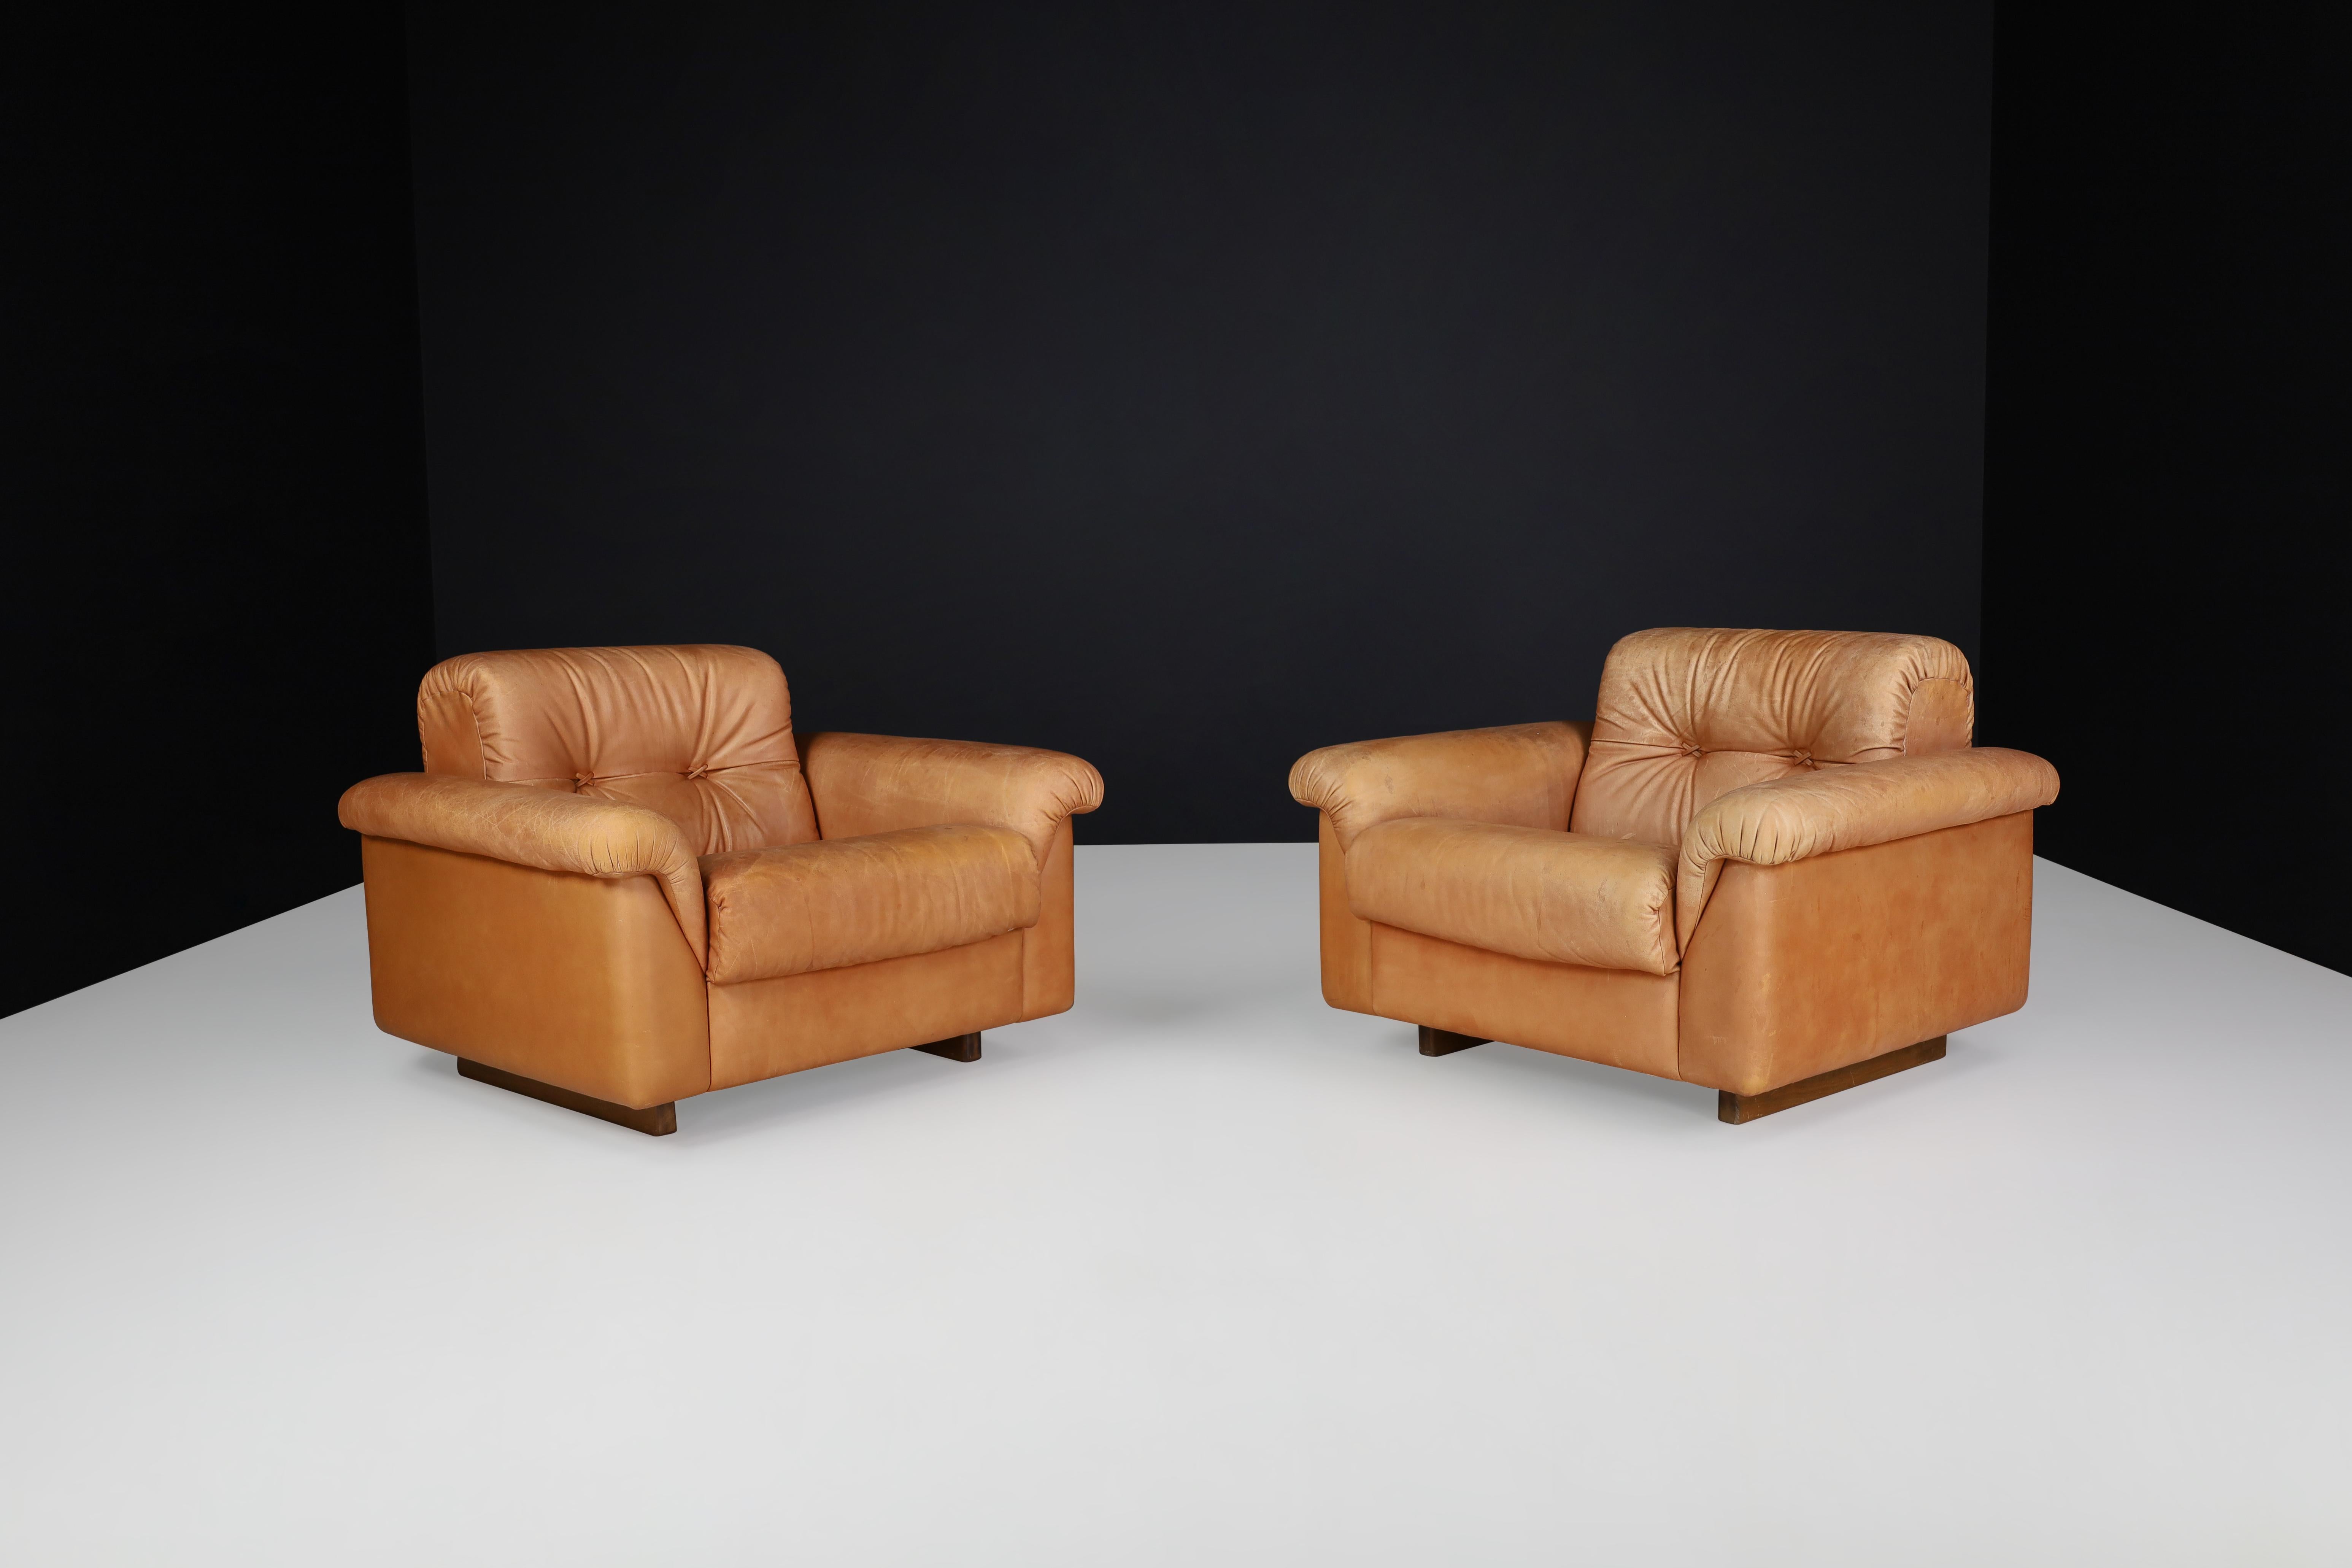 De Sede DS 45 Lounge Chairs in Patinated Leather, Switzerland, 1970s For Sale 5